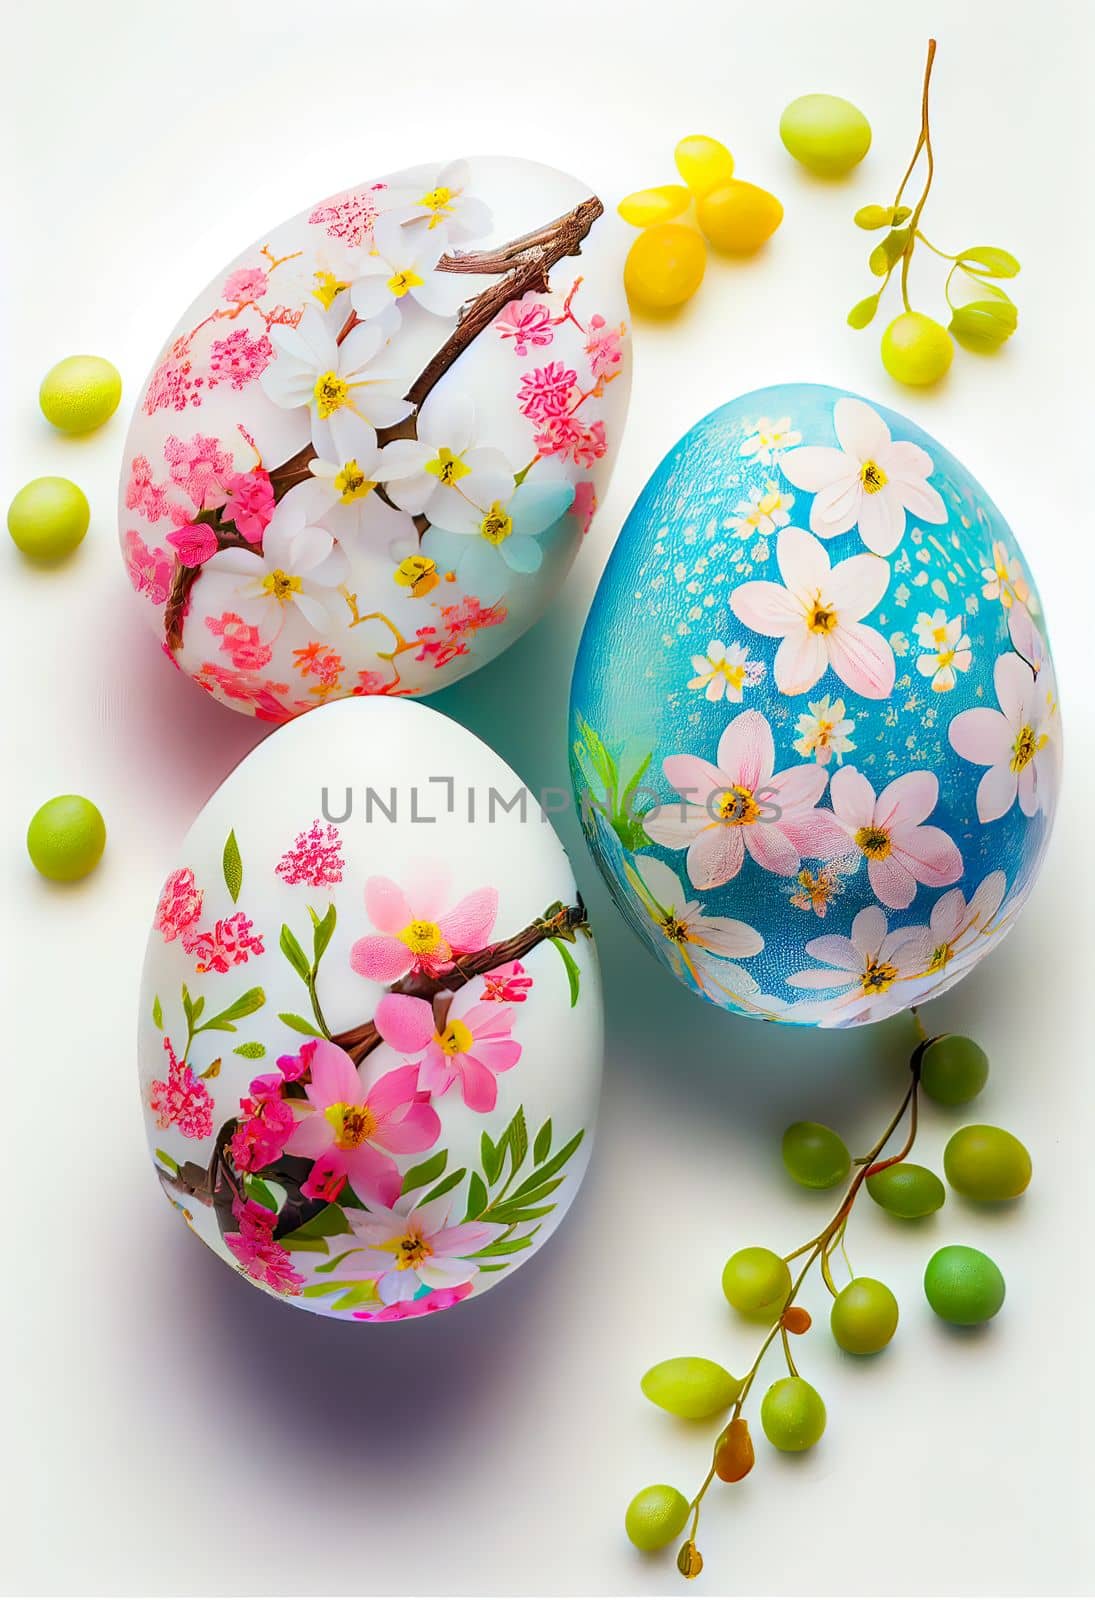 Colorful Easter eggs with cherry blossoms on white background. Design for Easter day. by FokasuArt